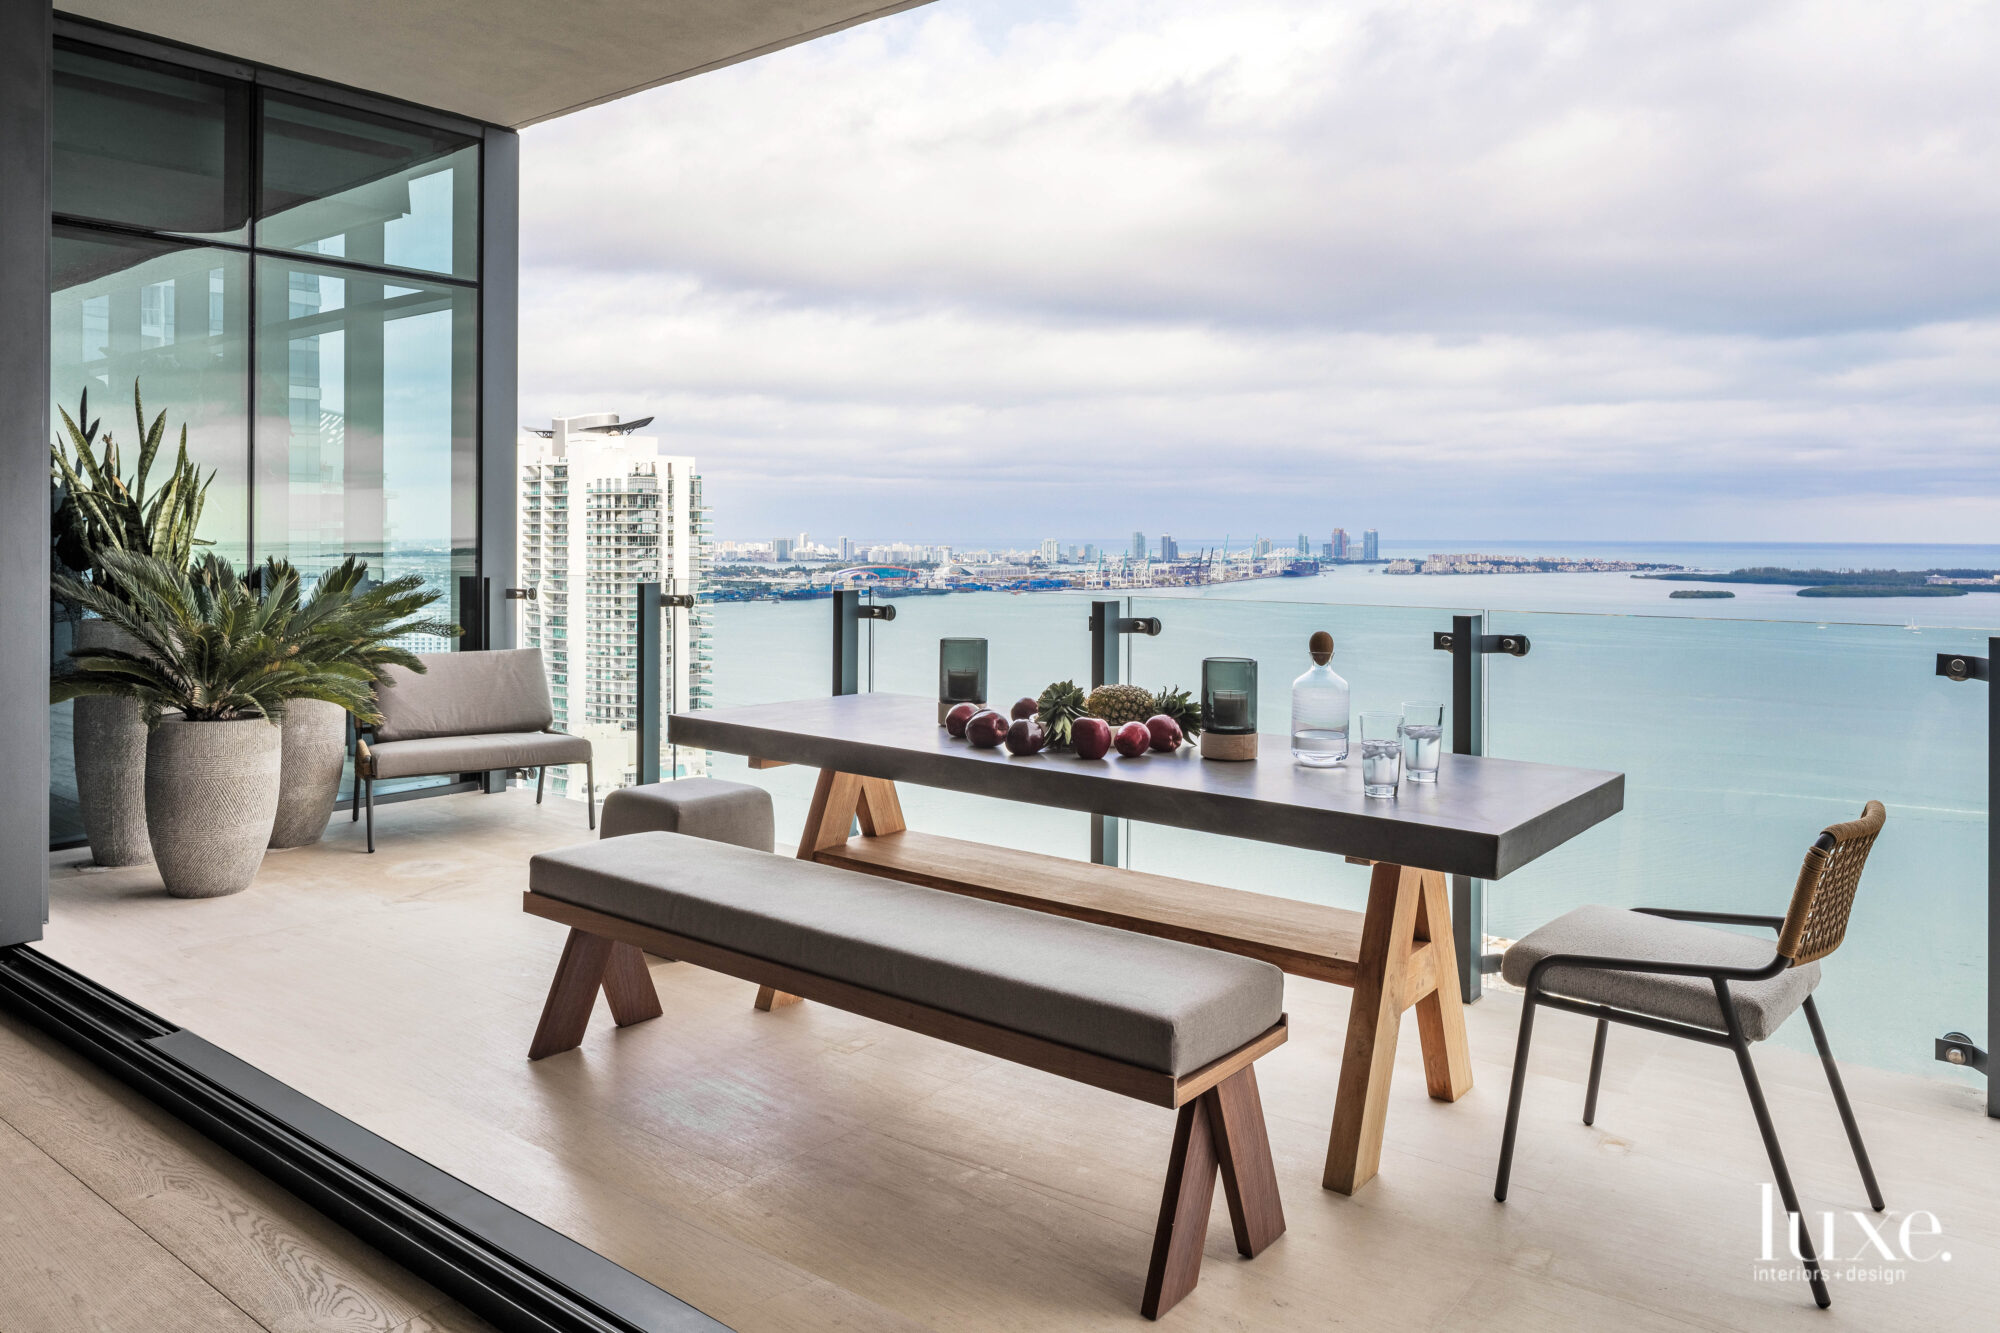 An outdoor dining area overlooking the waters of Biscayne Bay.